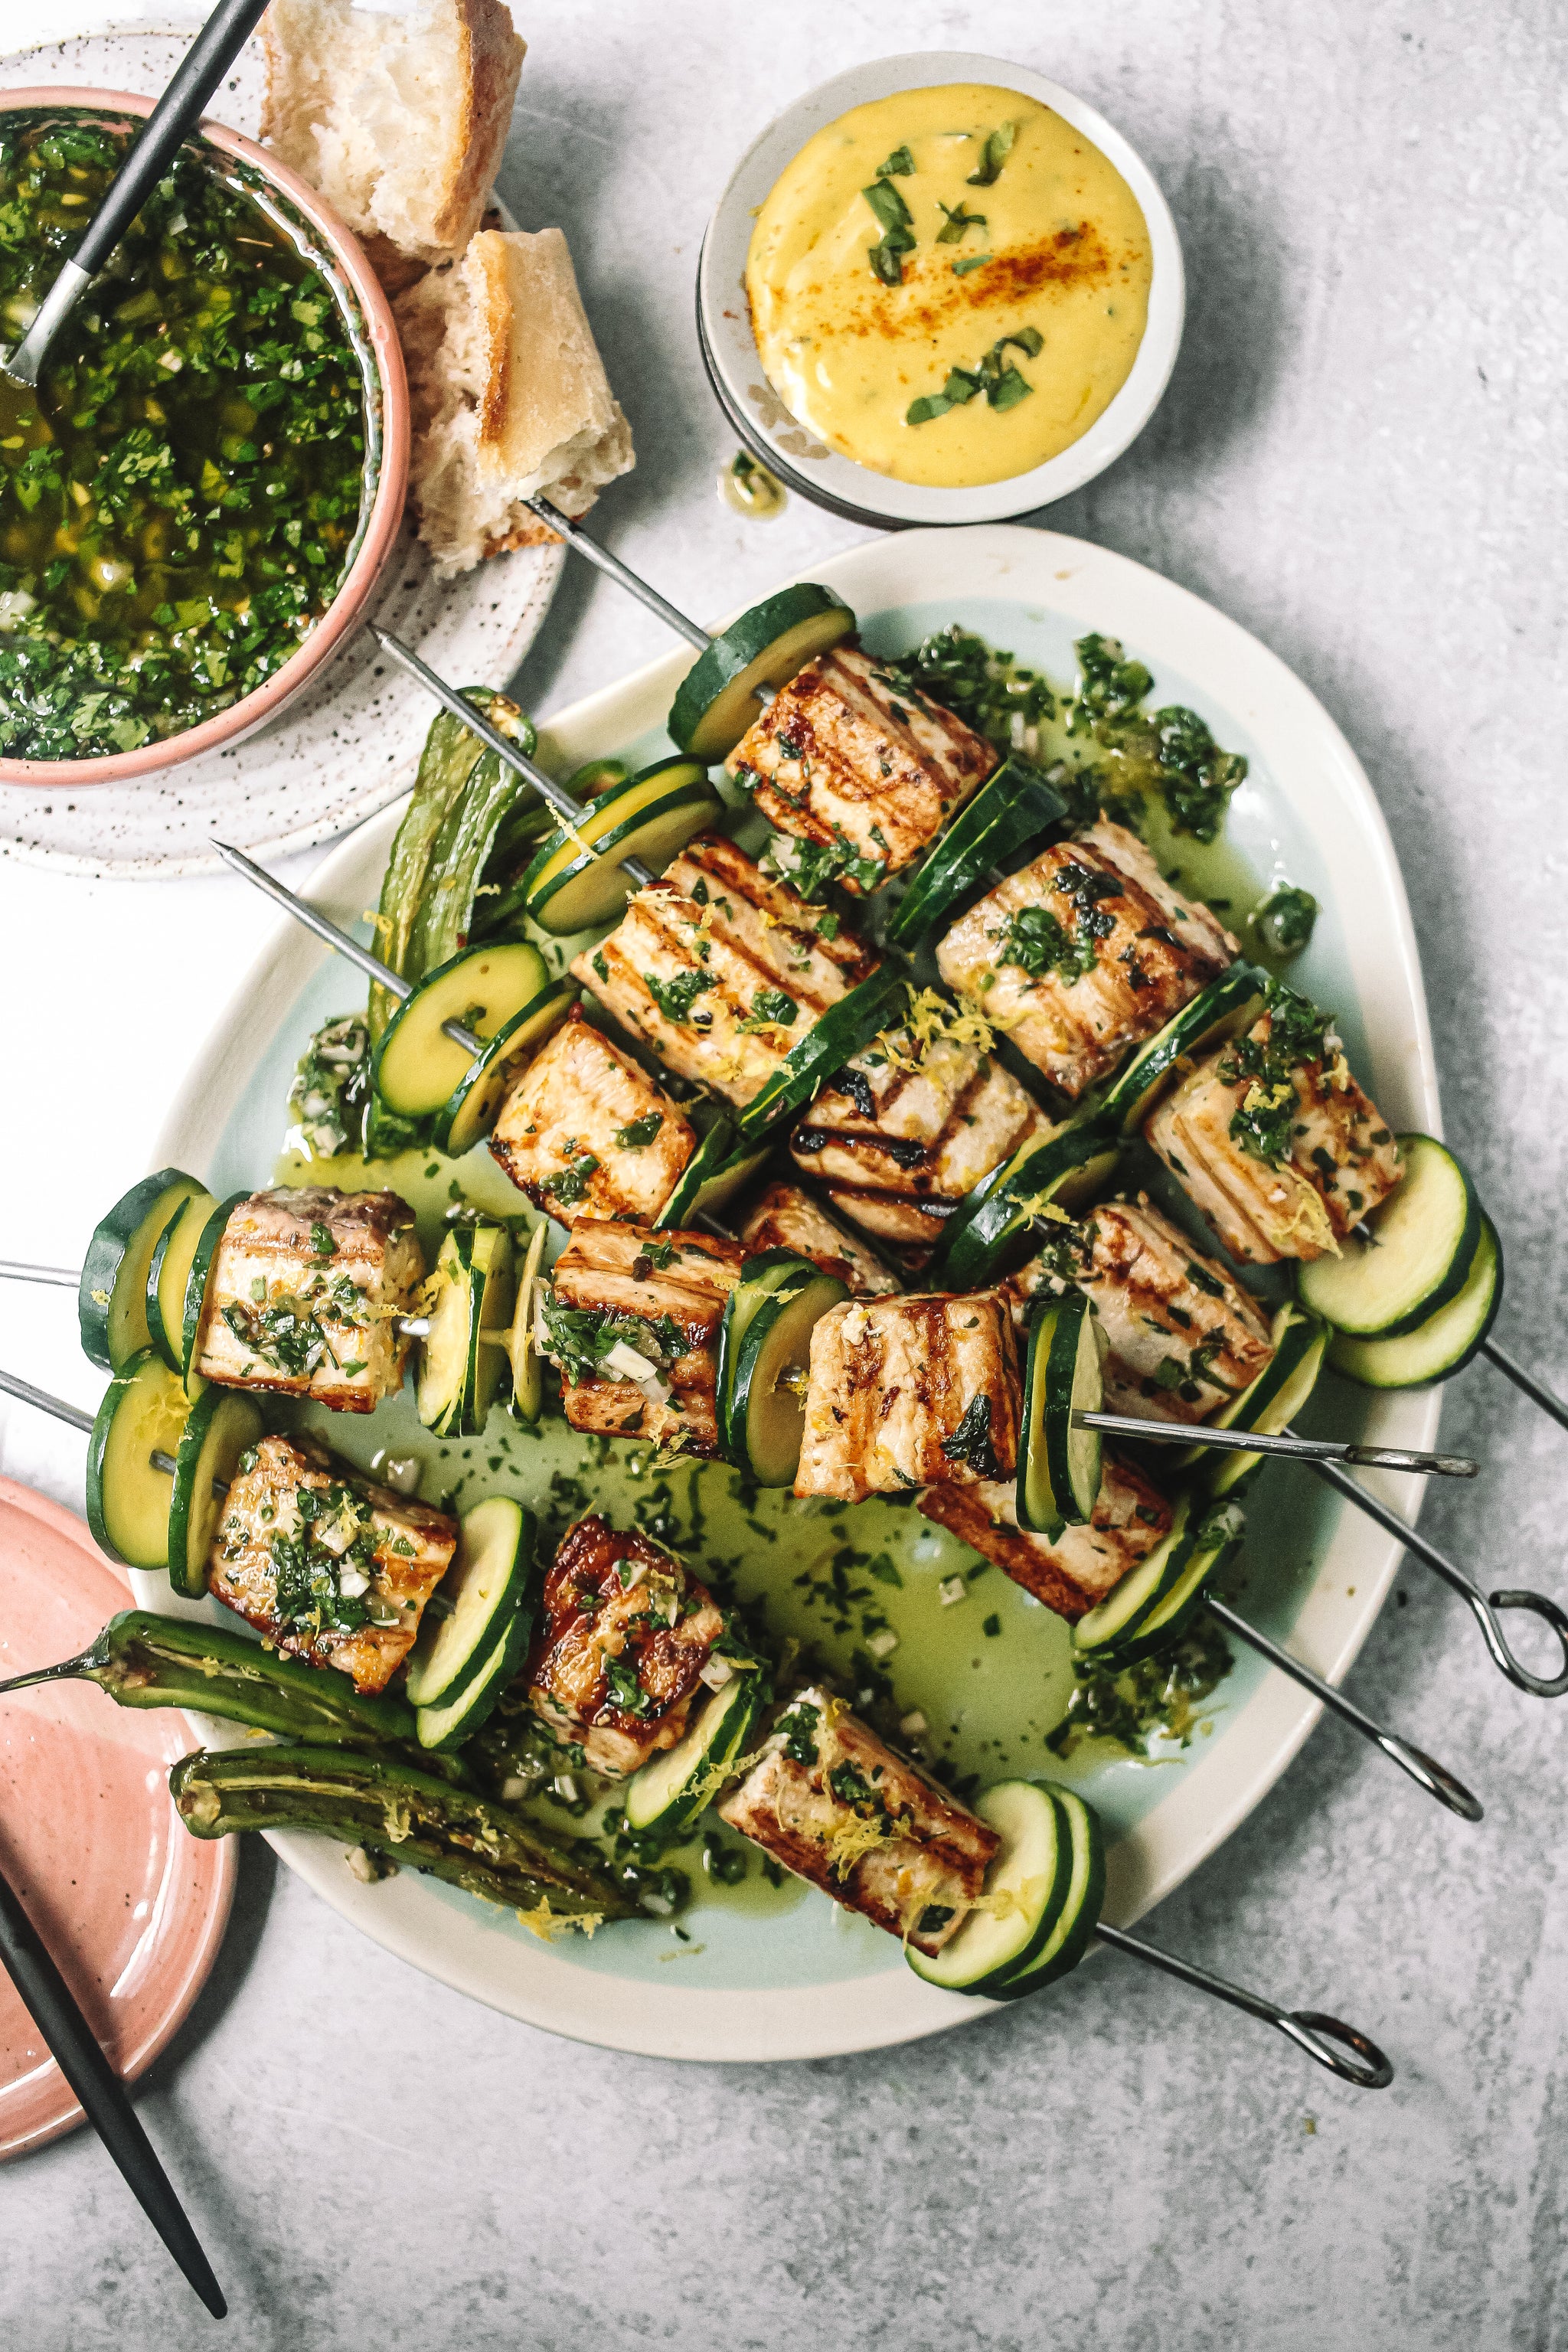 Grill Dad: Swordfish Skewers with Chimichurri 👨🏼‍🍳🎁